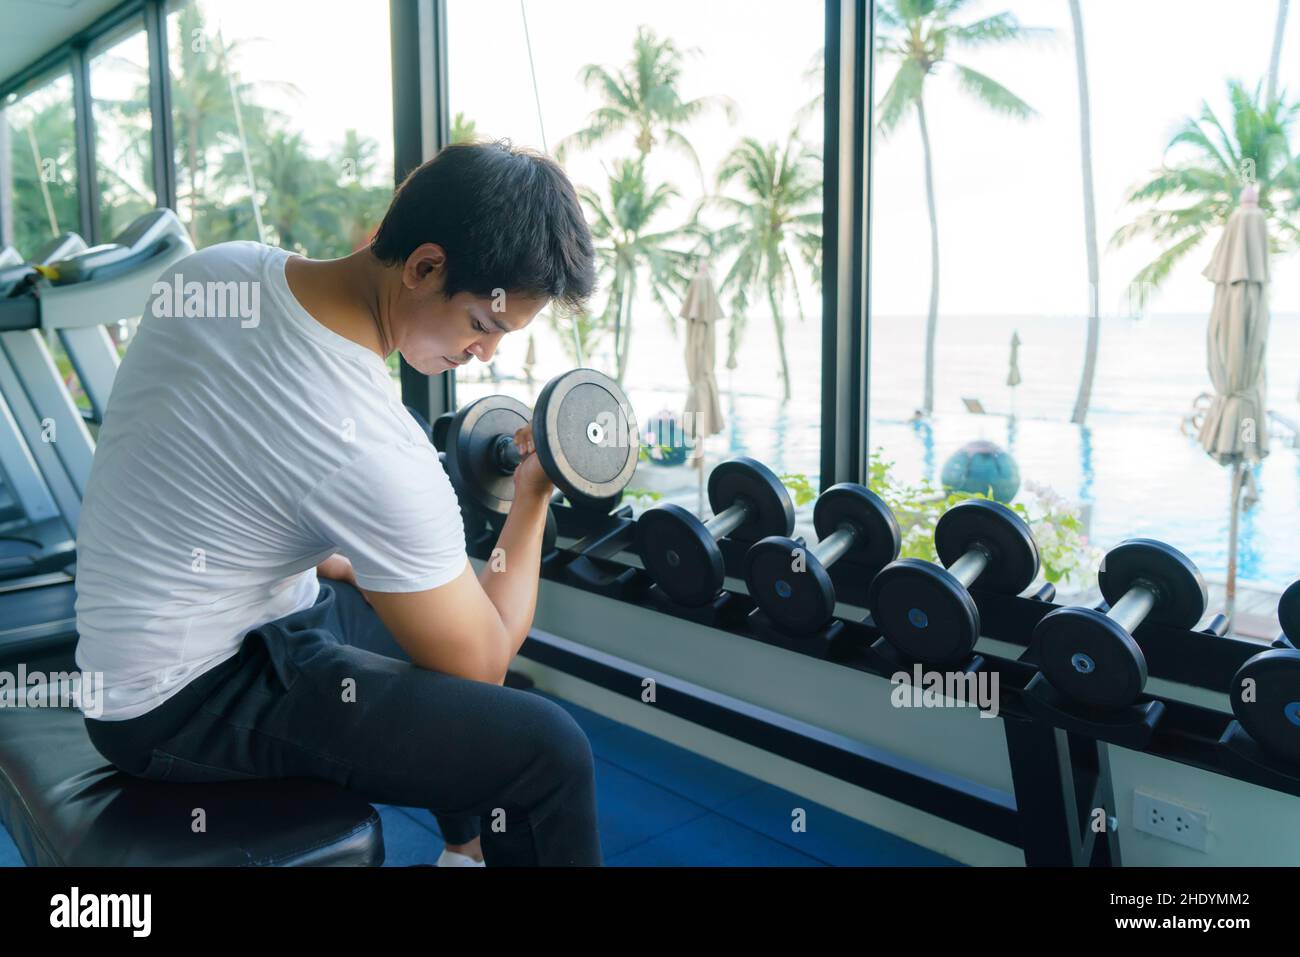 Asian man working out with DUMBBELL Weight Training at a resort fitness center in the morning. Stock Photo